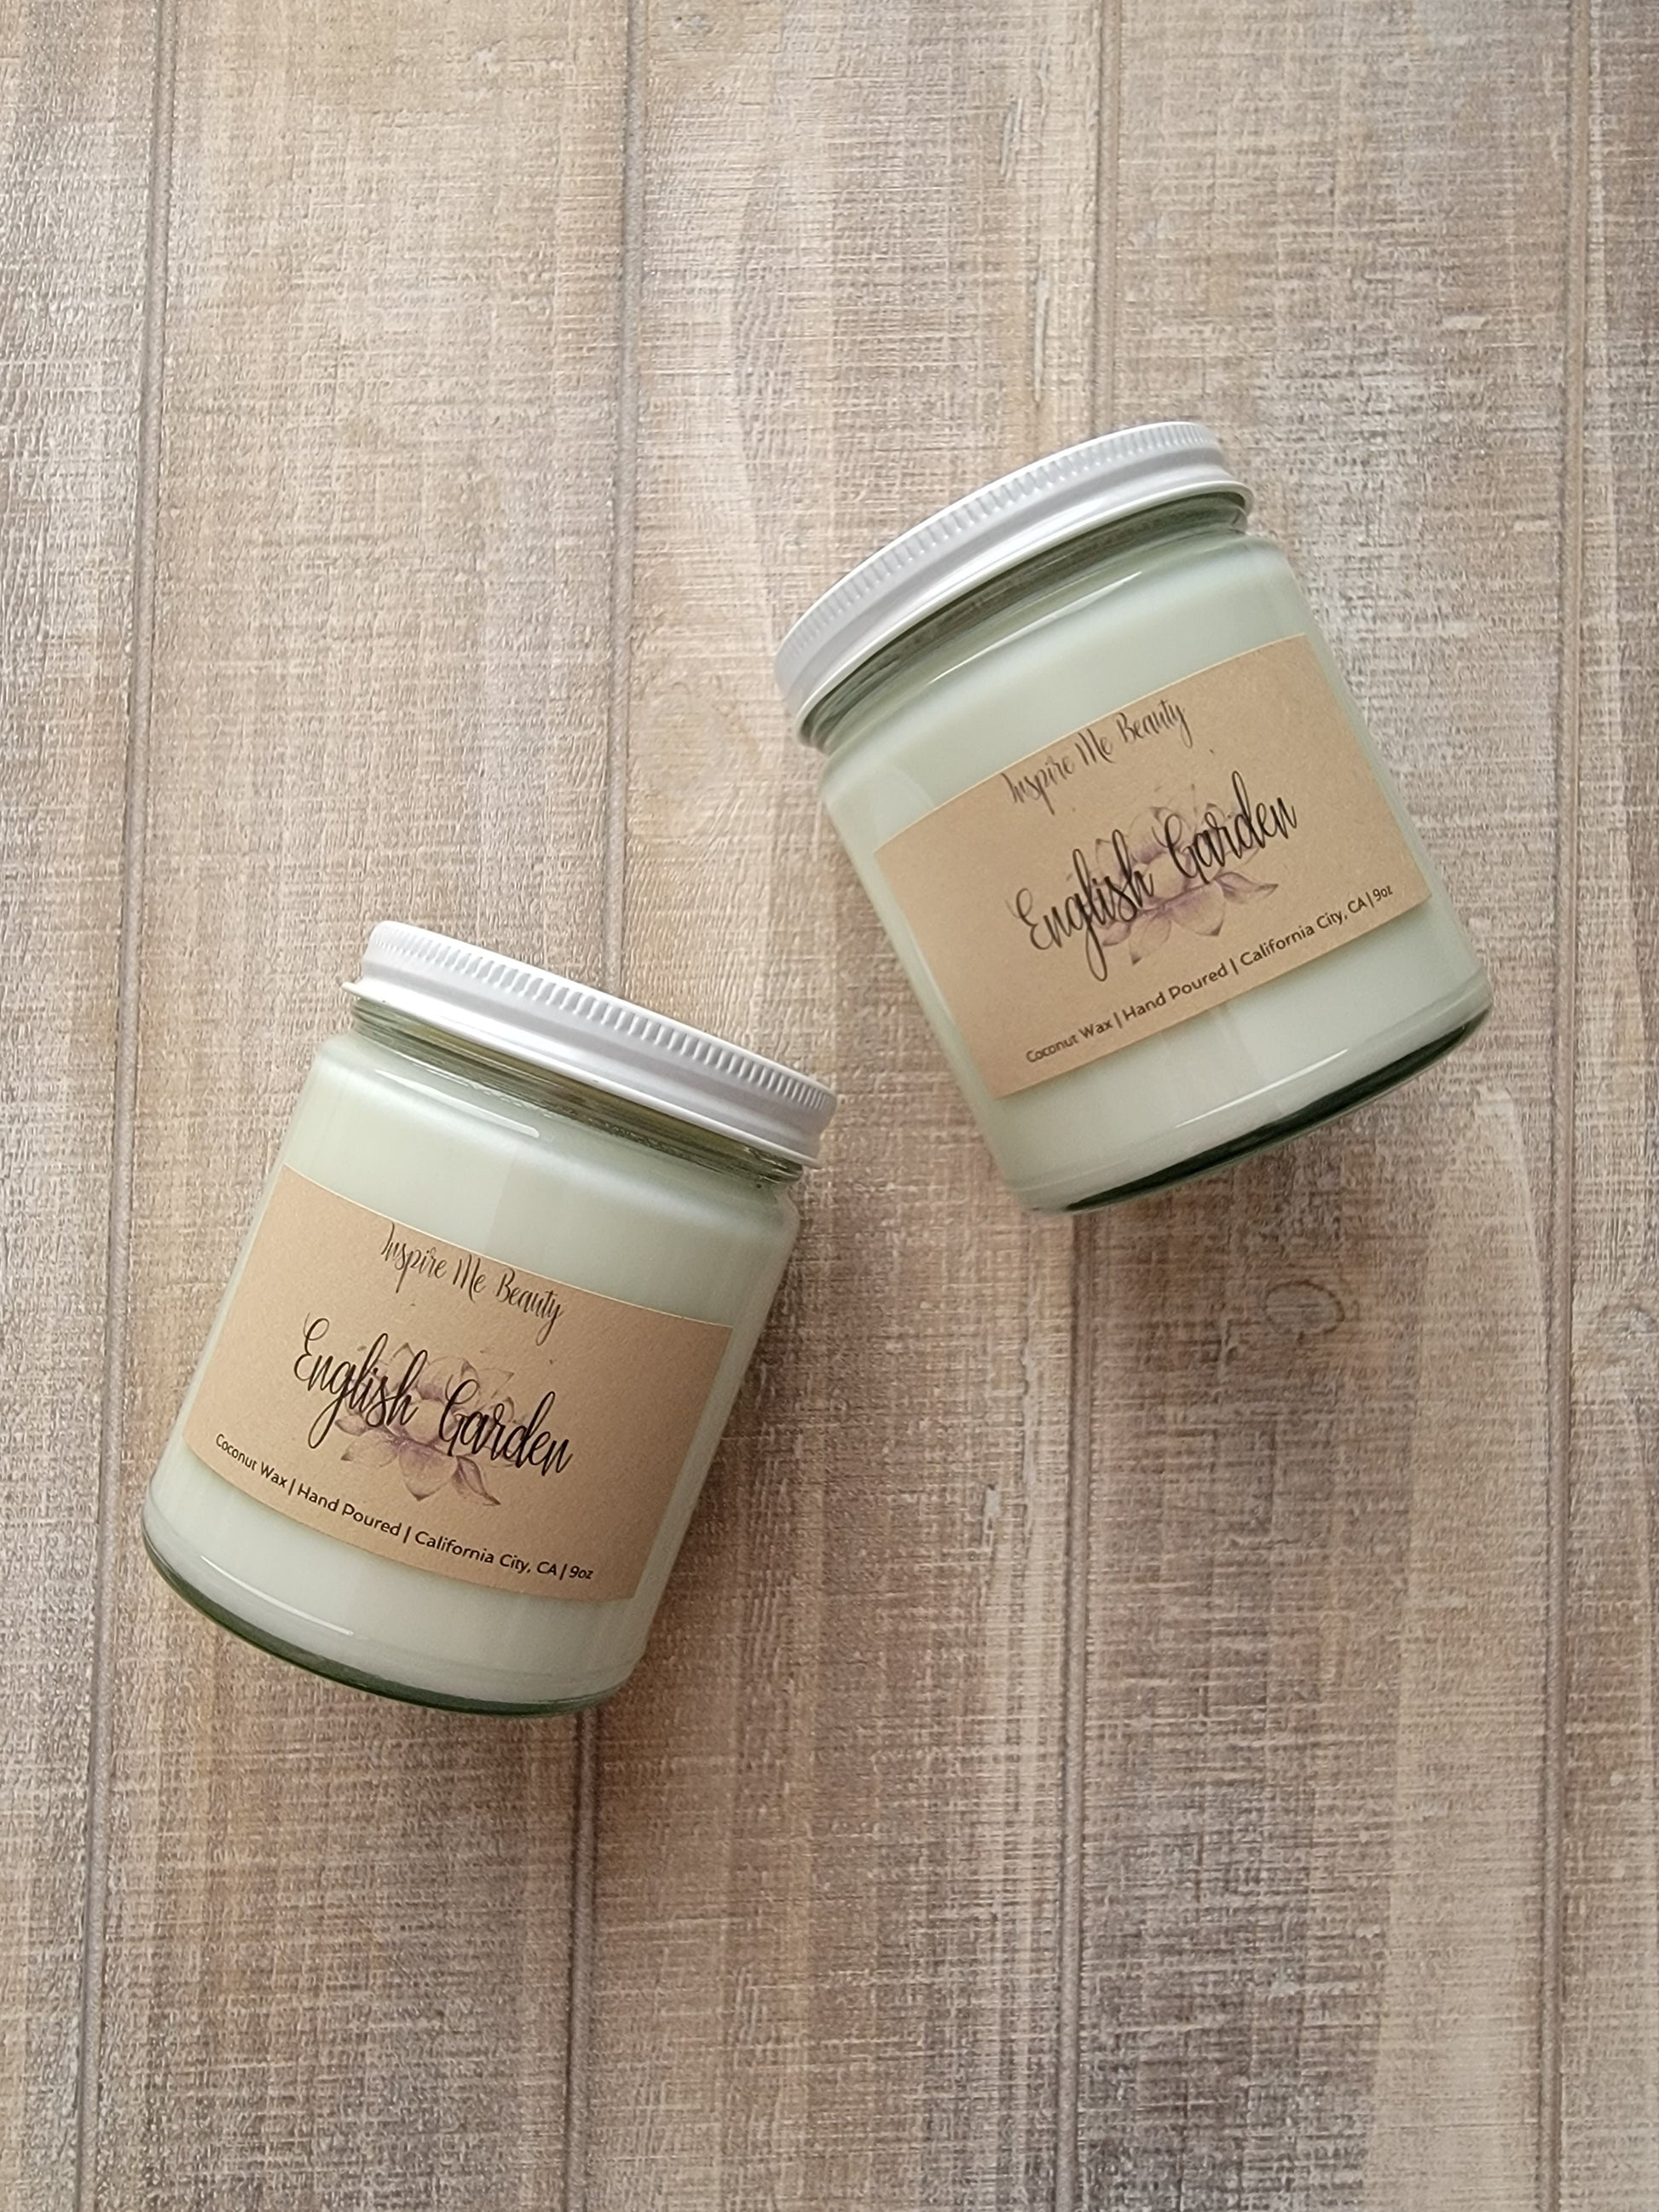 English Garden Candle by Inspire Me Beauty made with Coconut Wax